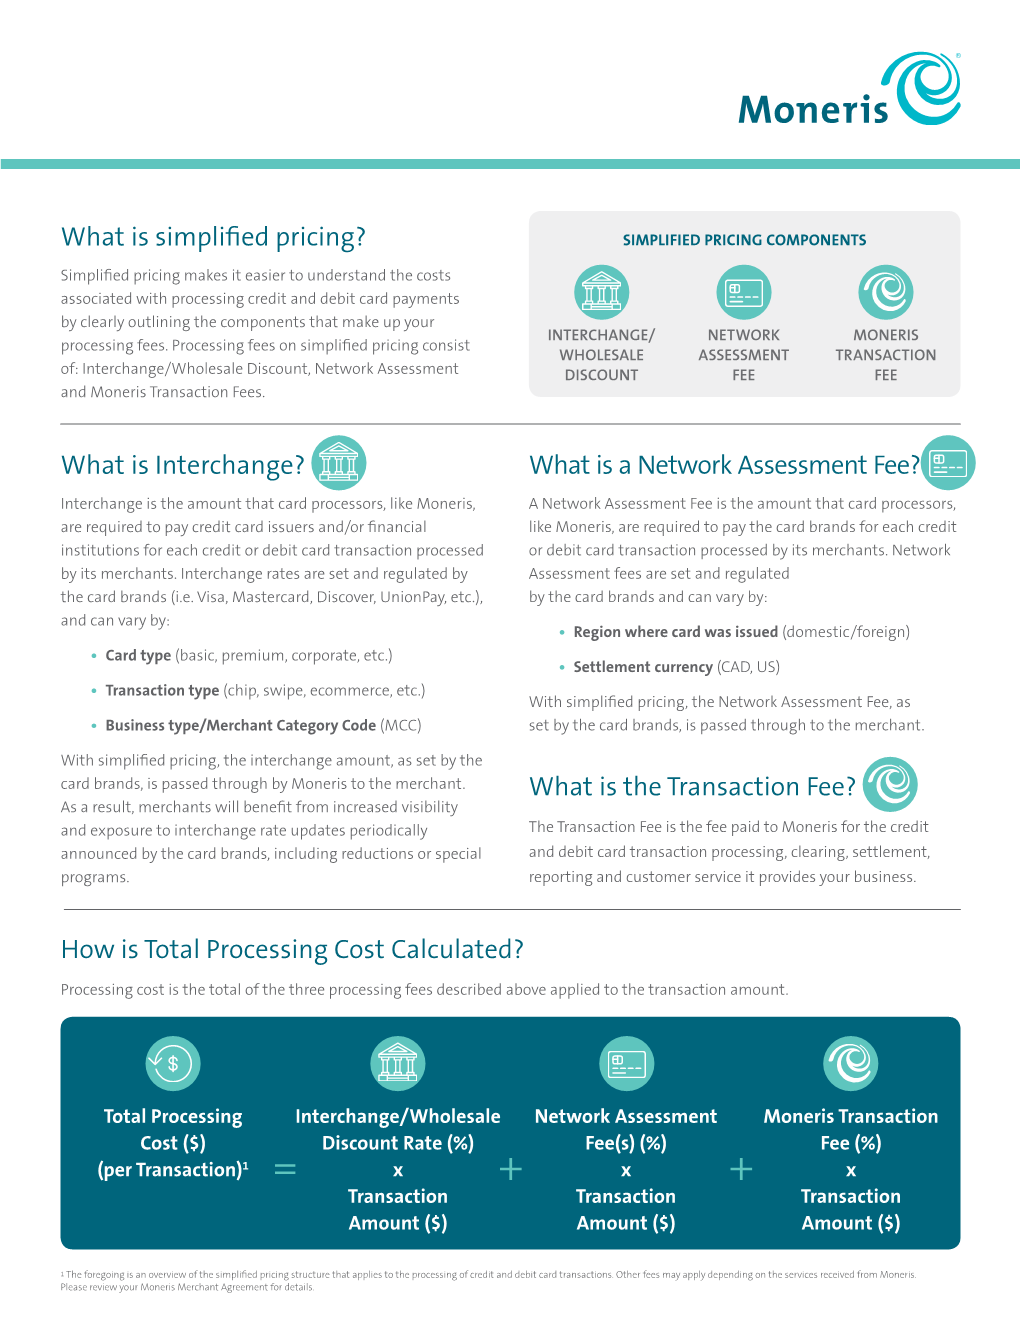 What Is a Network Assessment Fee? What Is the Transaction